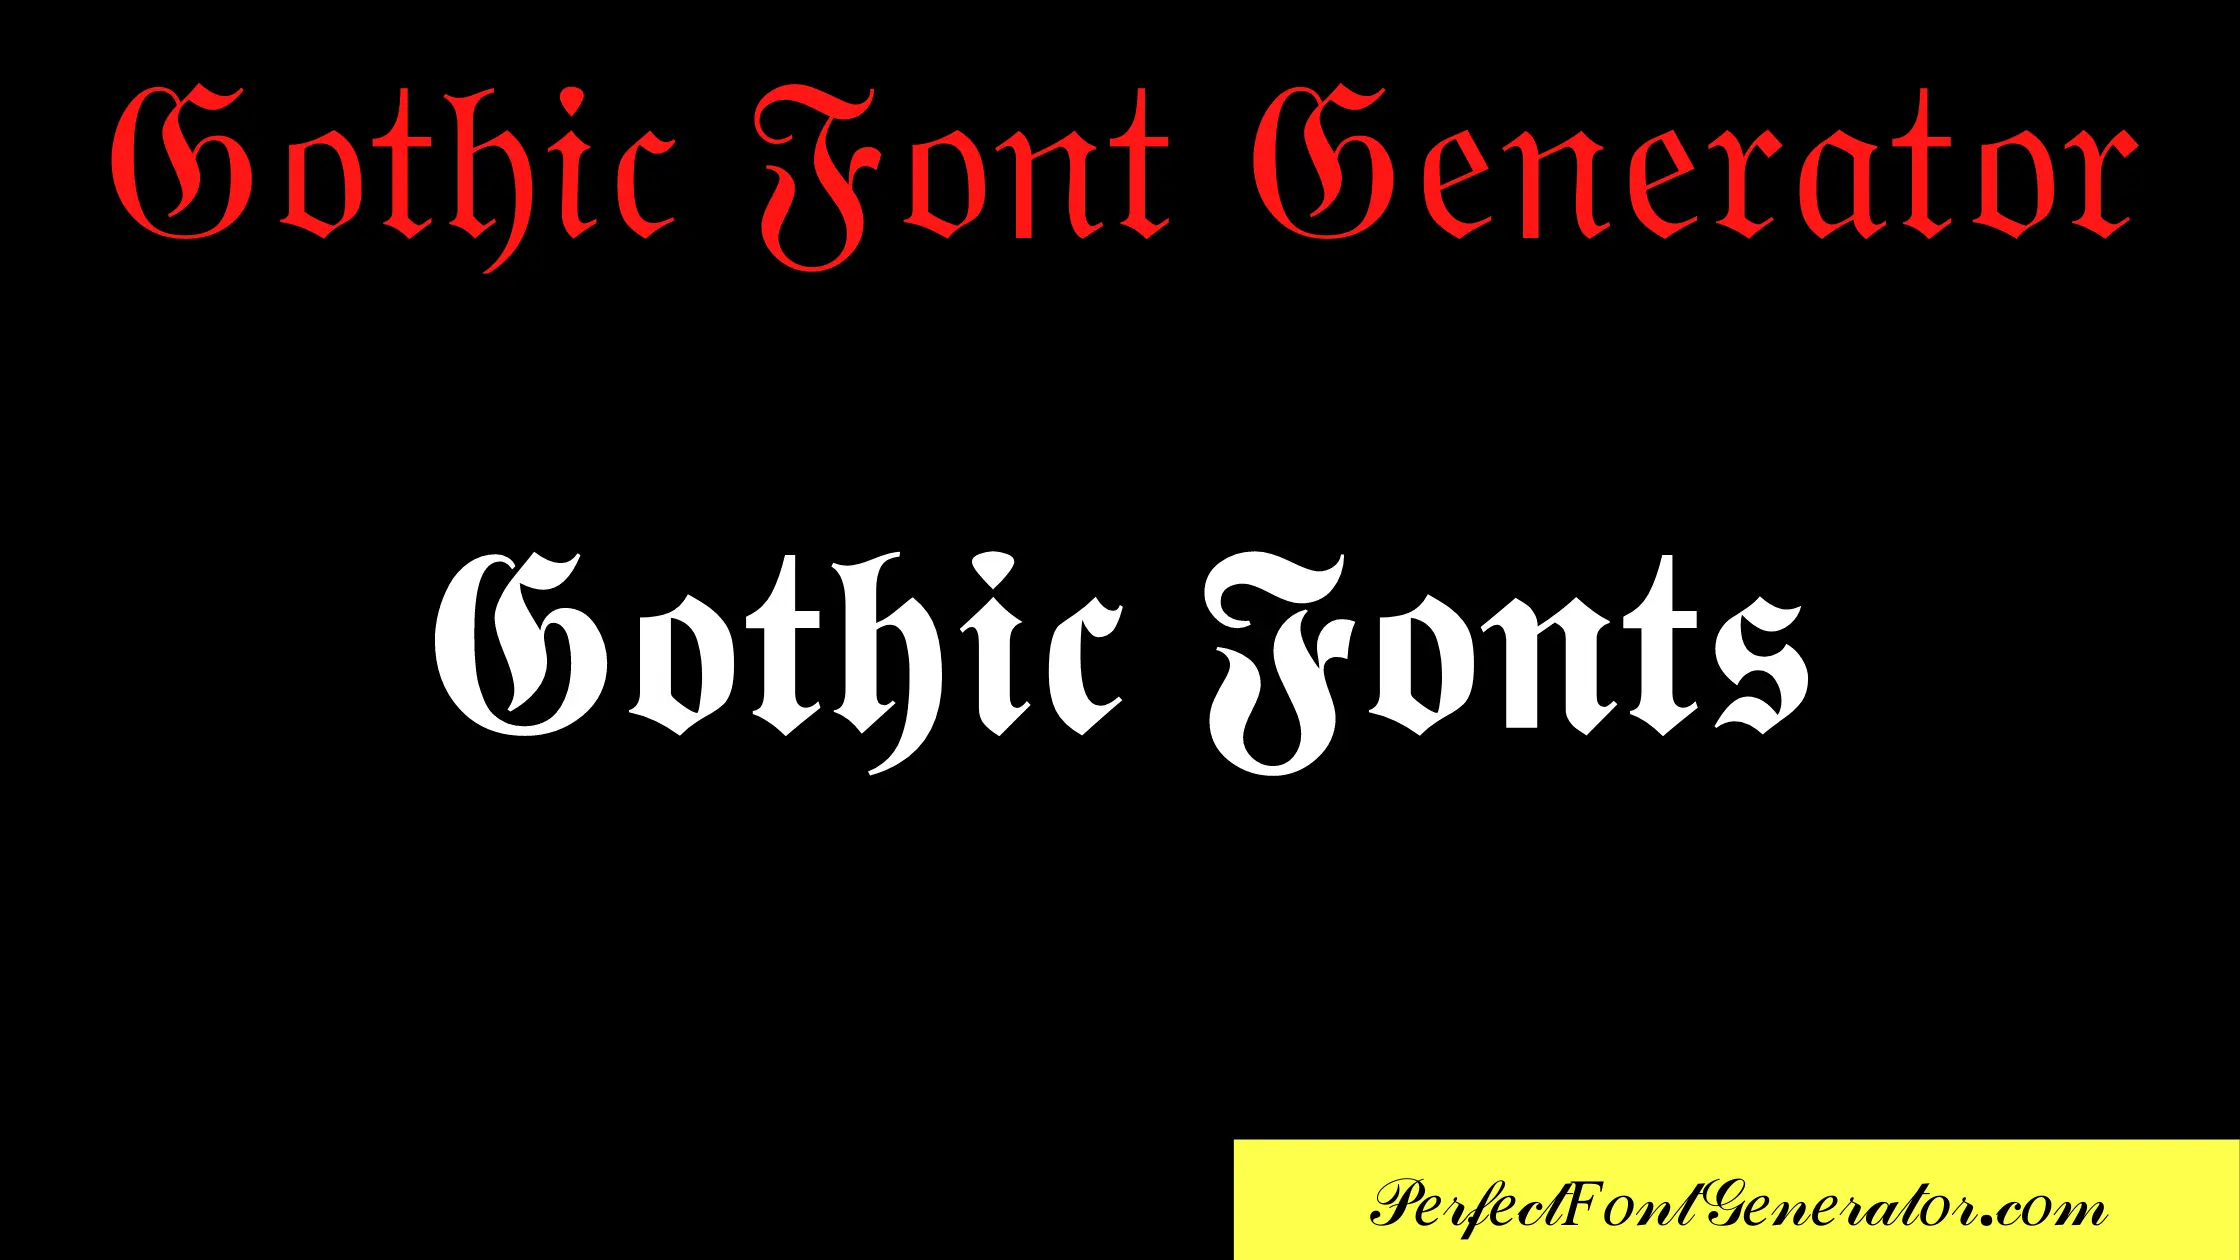 gothic text copy and paste